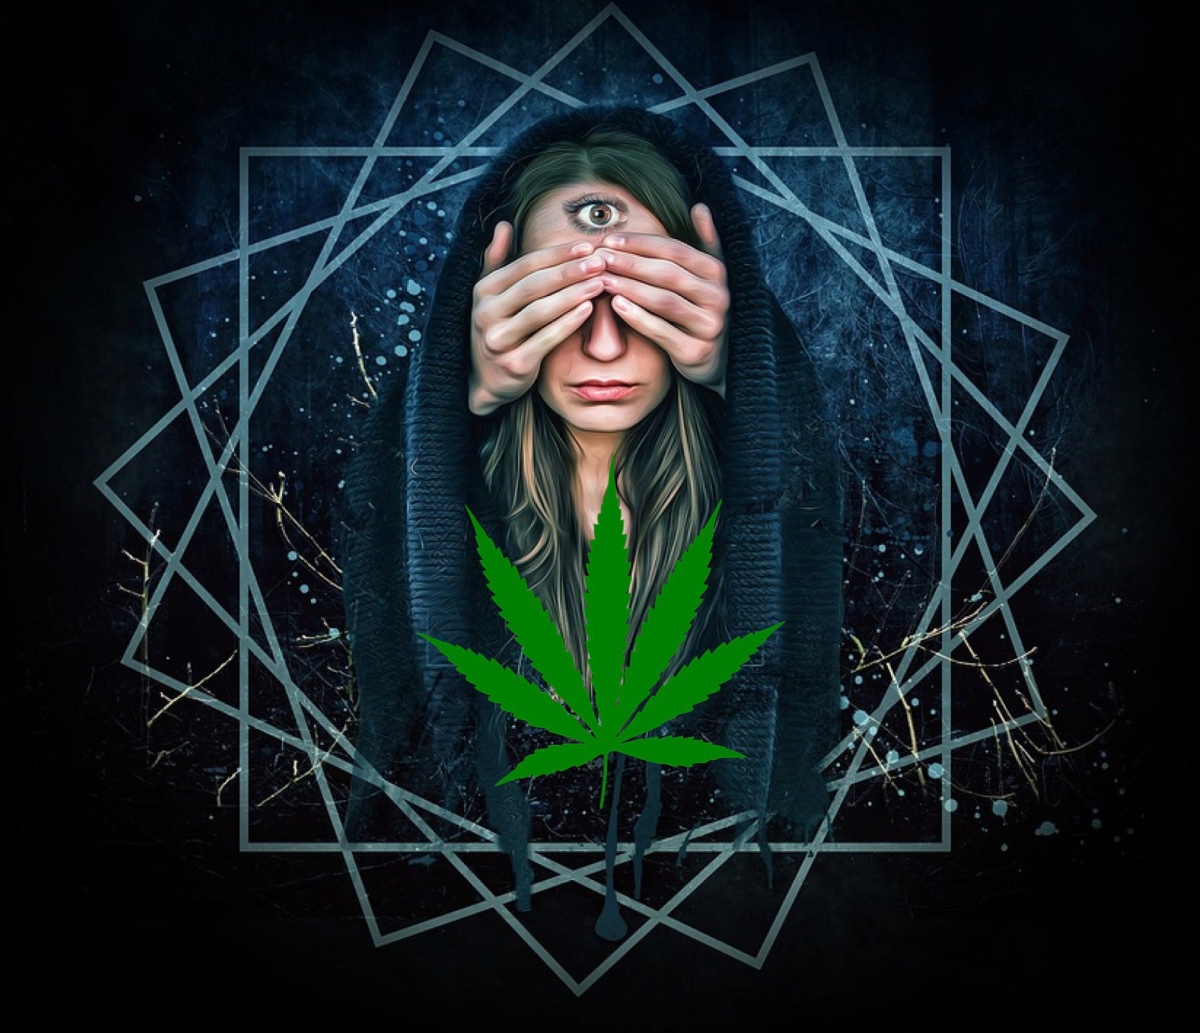 Everyone knows of the stereotypical stoner who seems to having “psychic experiences”, but what is the validity of the link between marijuana and e